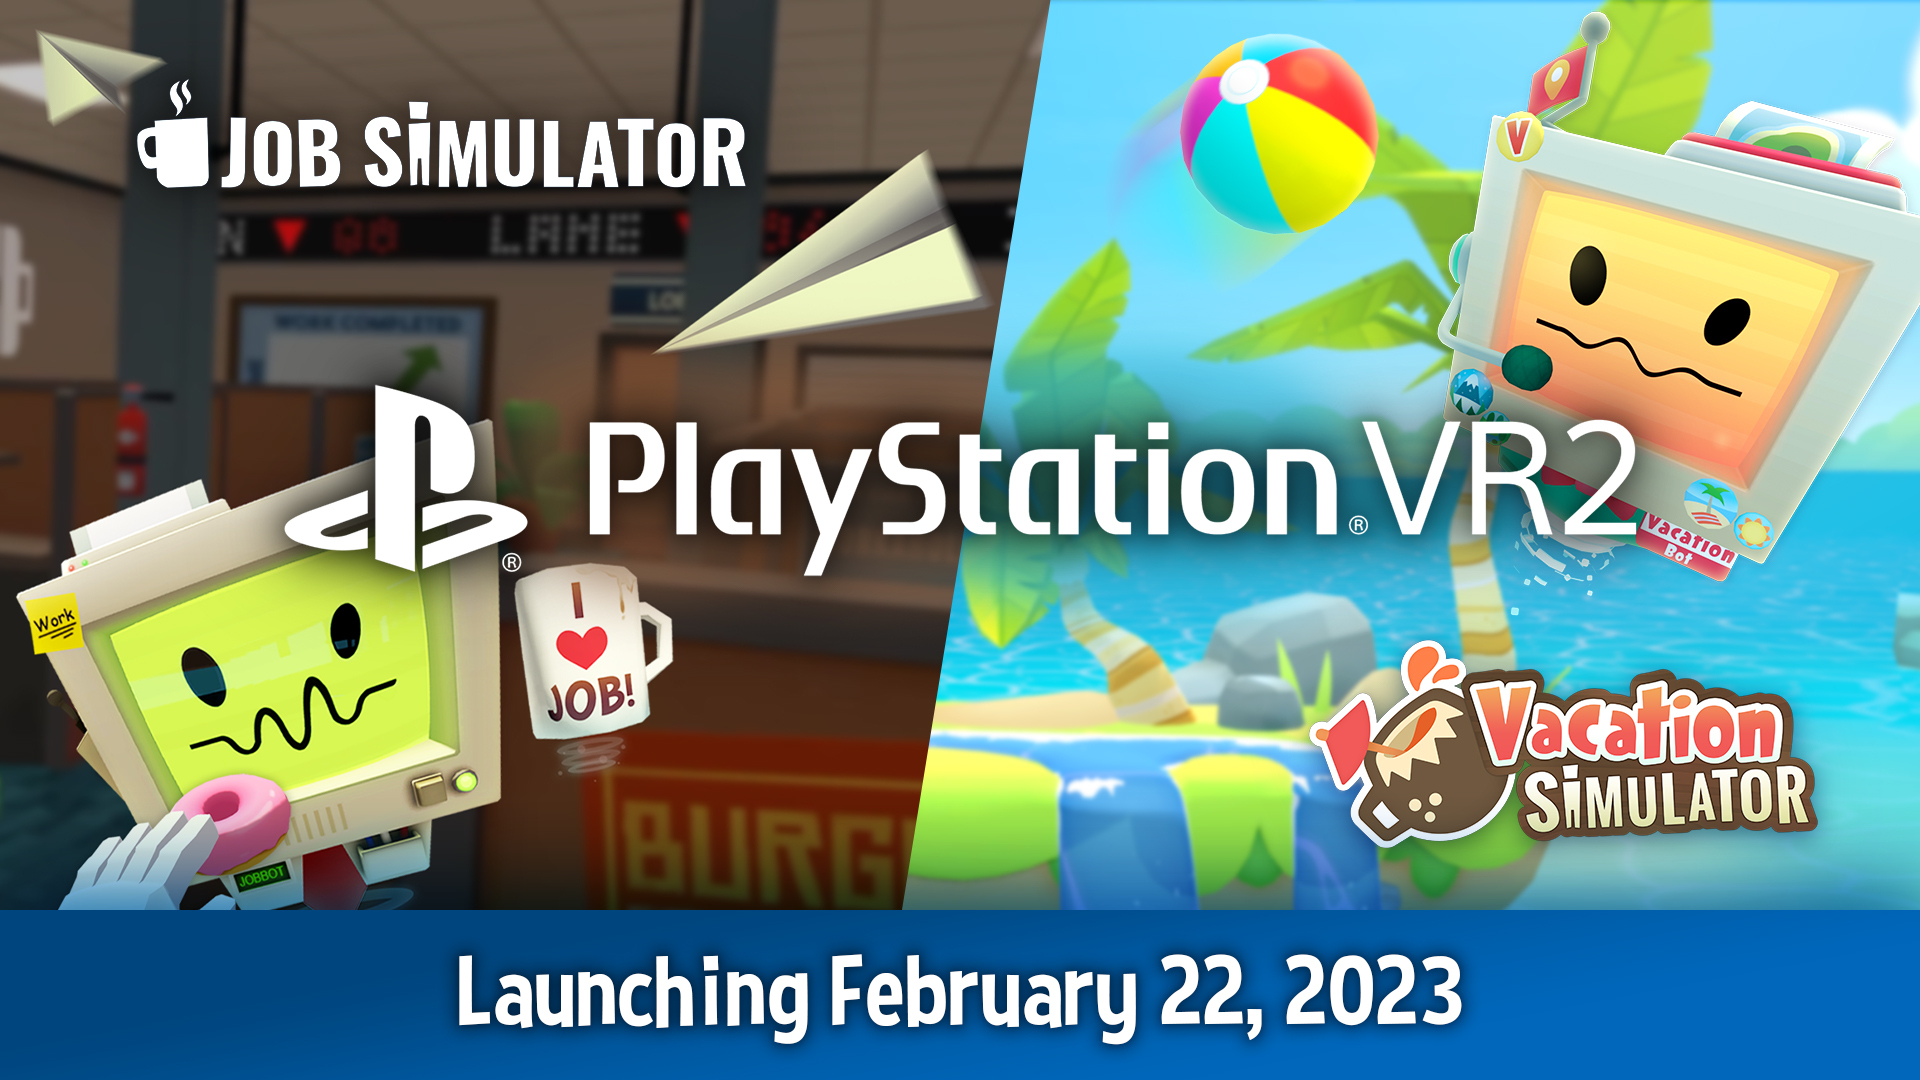 Labs on Twitter: official! [JOB SIMULATOR] and [VACATION SIMULATOR] are coming to on launch day! Those who own PS copies will receive a FREE upgrade. If not, #JobSimulator